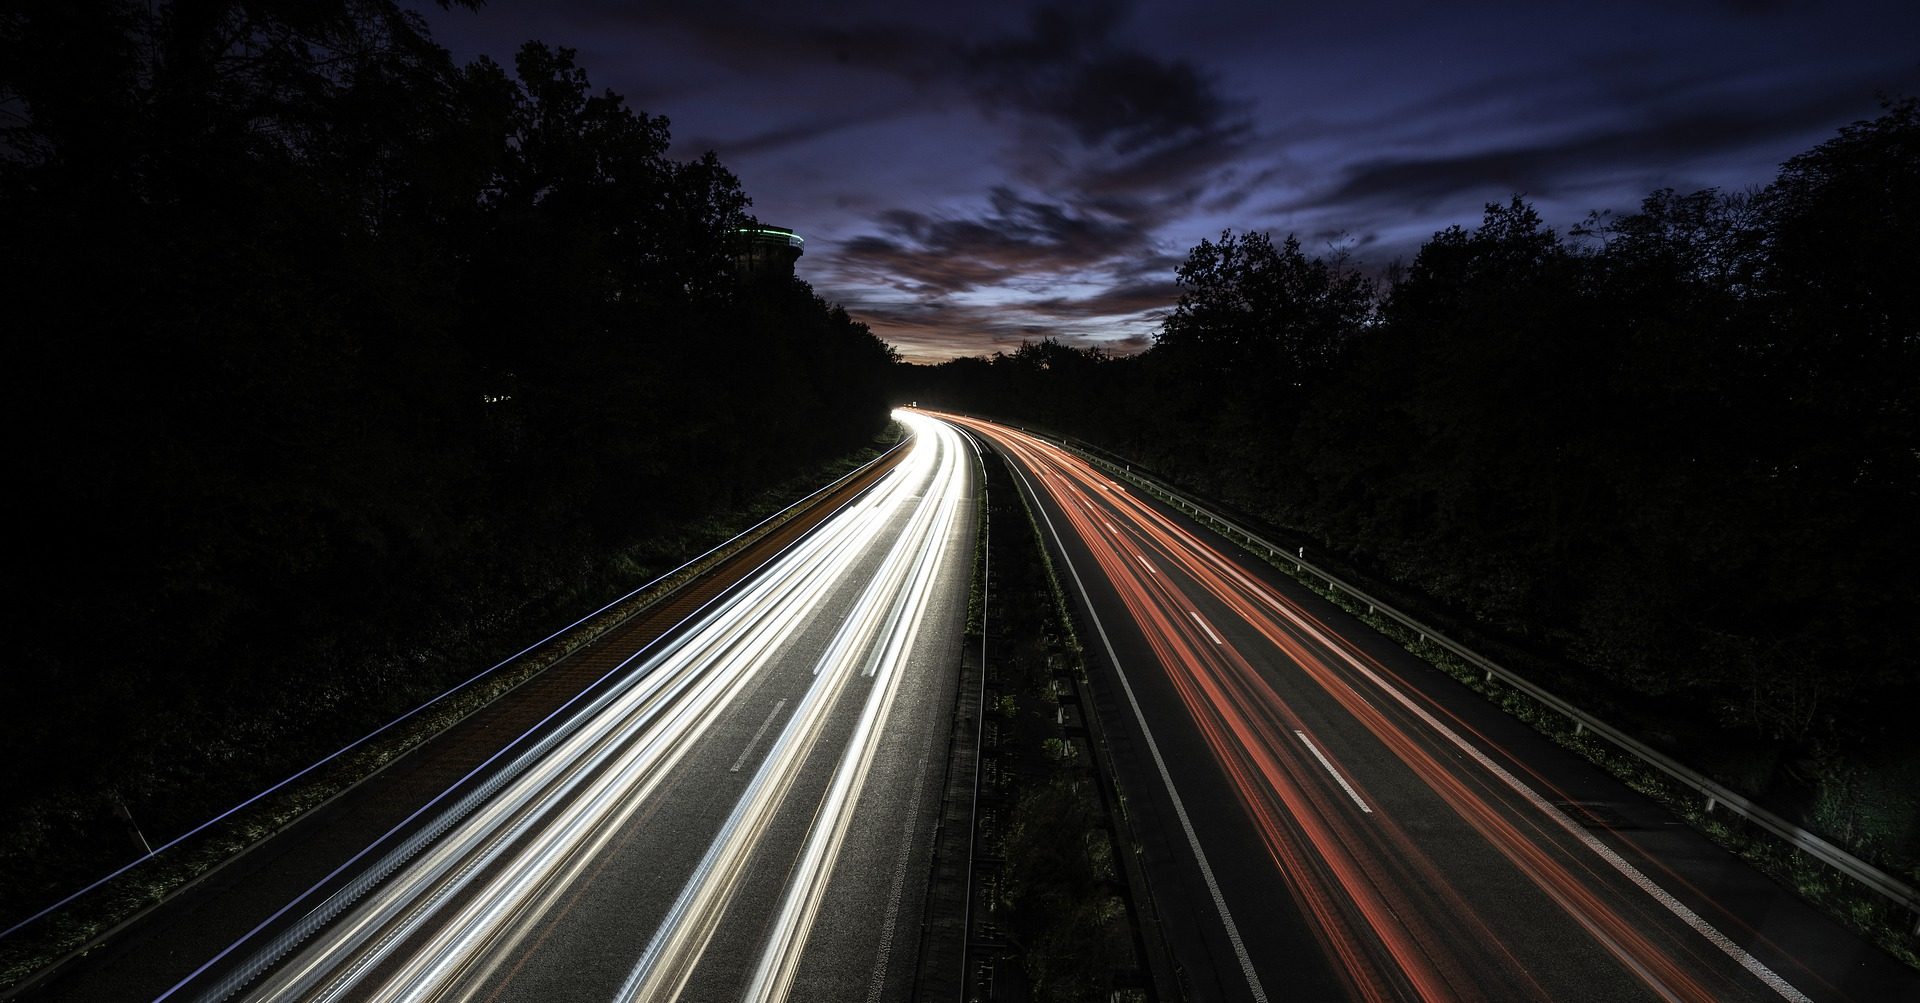 Highway headlights with time lapse photography.